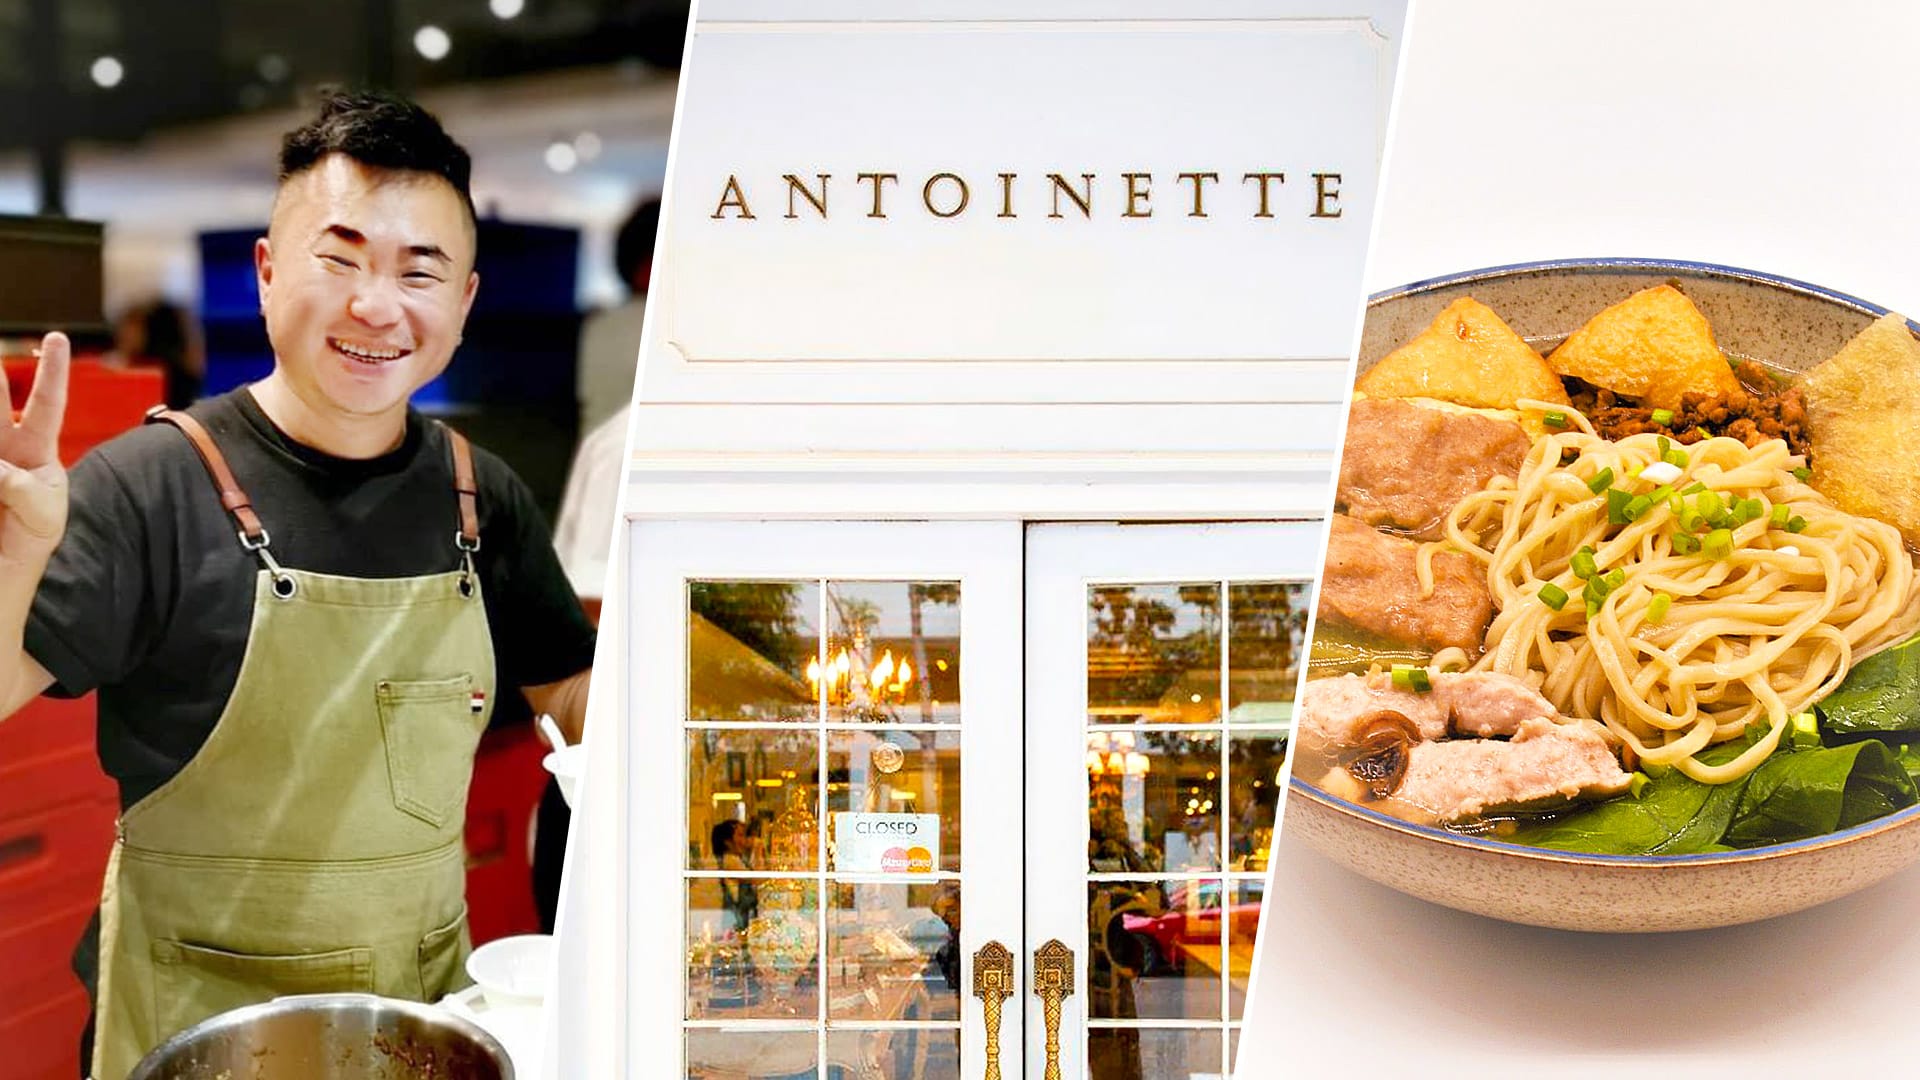 French Patisserie Antoinette Closing Down, Chef-Owner Opening Noodle Stall Instead